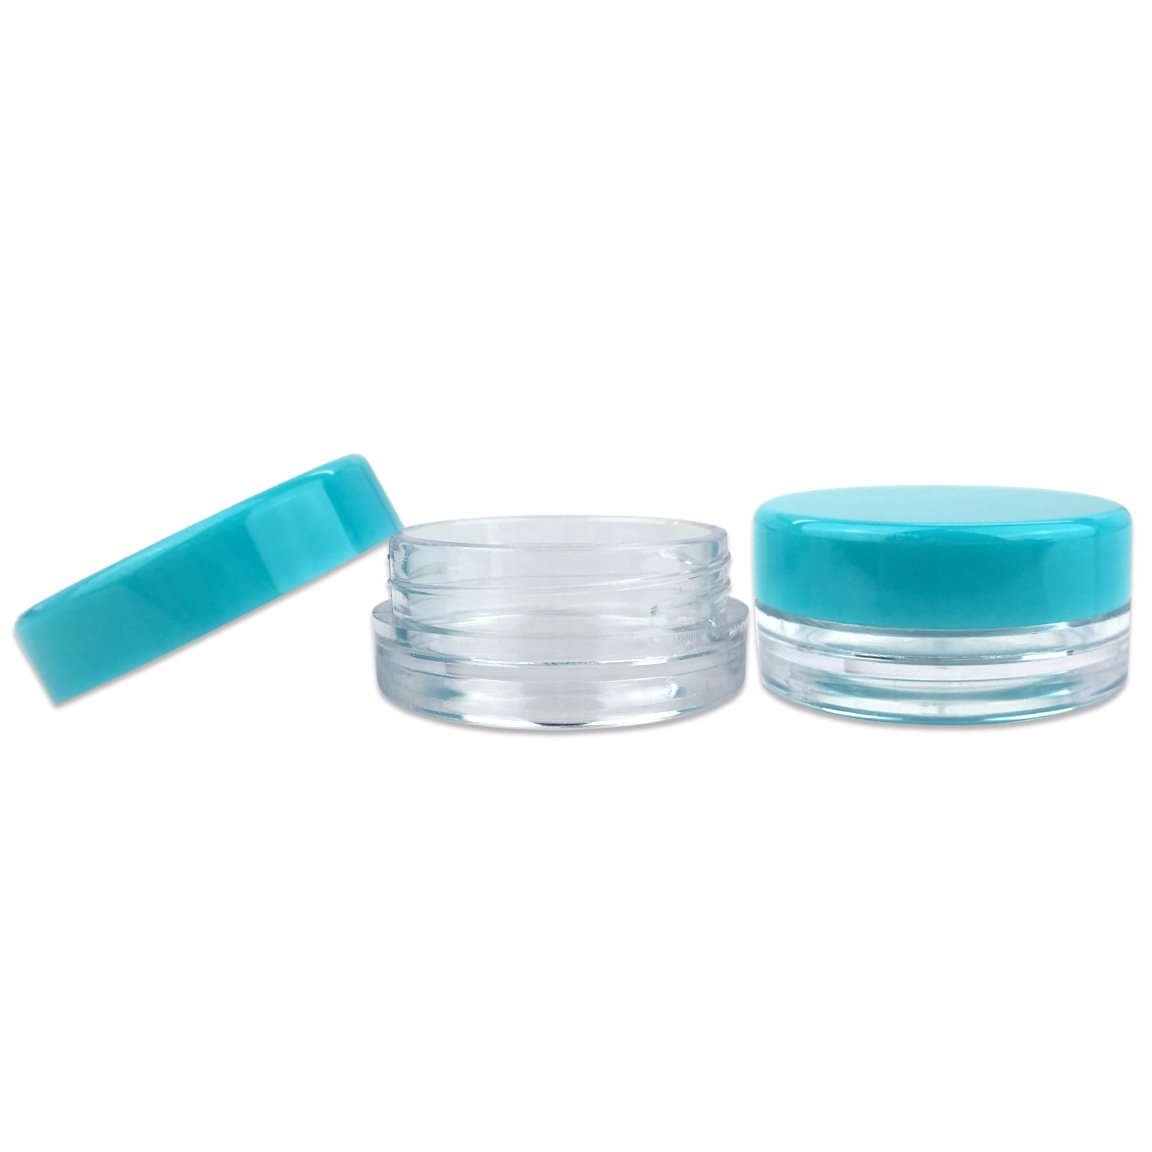 Beauticom 3g/3ml (0.1 Fl Oz) Round Clear Plastic Jars with Round Top Lids for Creams, Lotions, Make Up, Powders, Glitters, and more... (Color: Teal Lid Quantity: 50 Pieces)